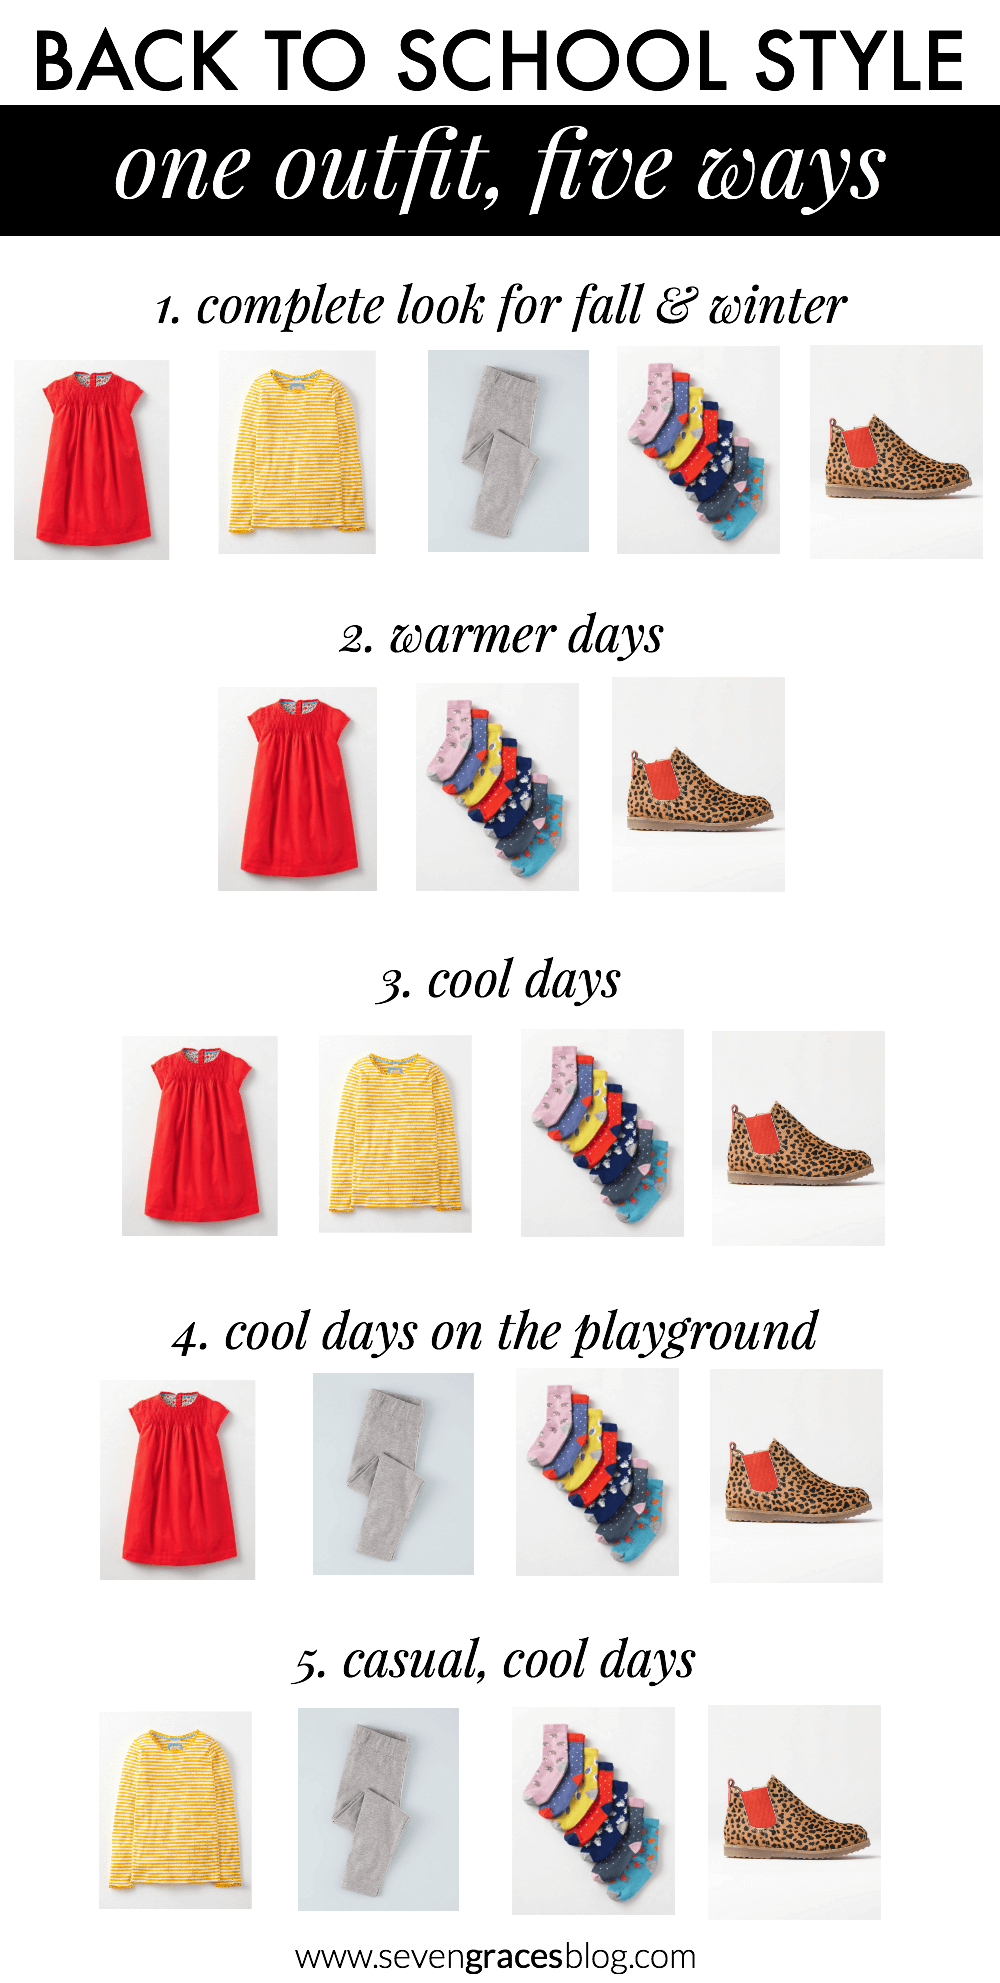 Back to school style. One outfit, five ways. Here's how you can create a great outfit for your little girl that will last from the beginning of the school year well into winter. #BodenBacktoSchool